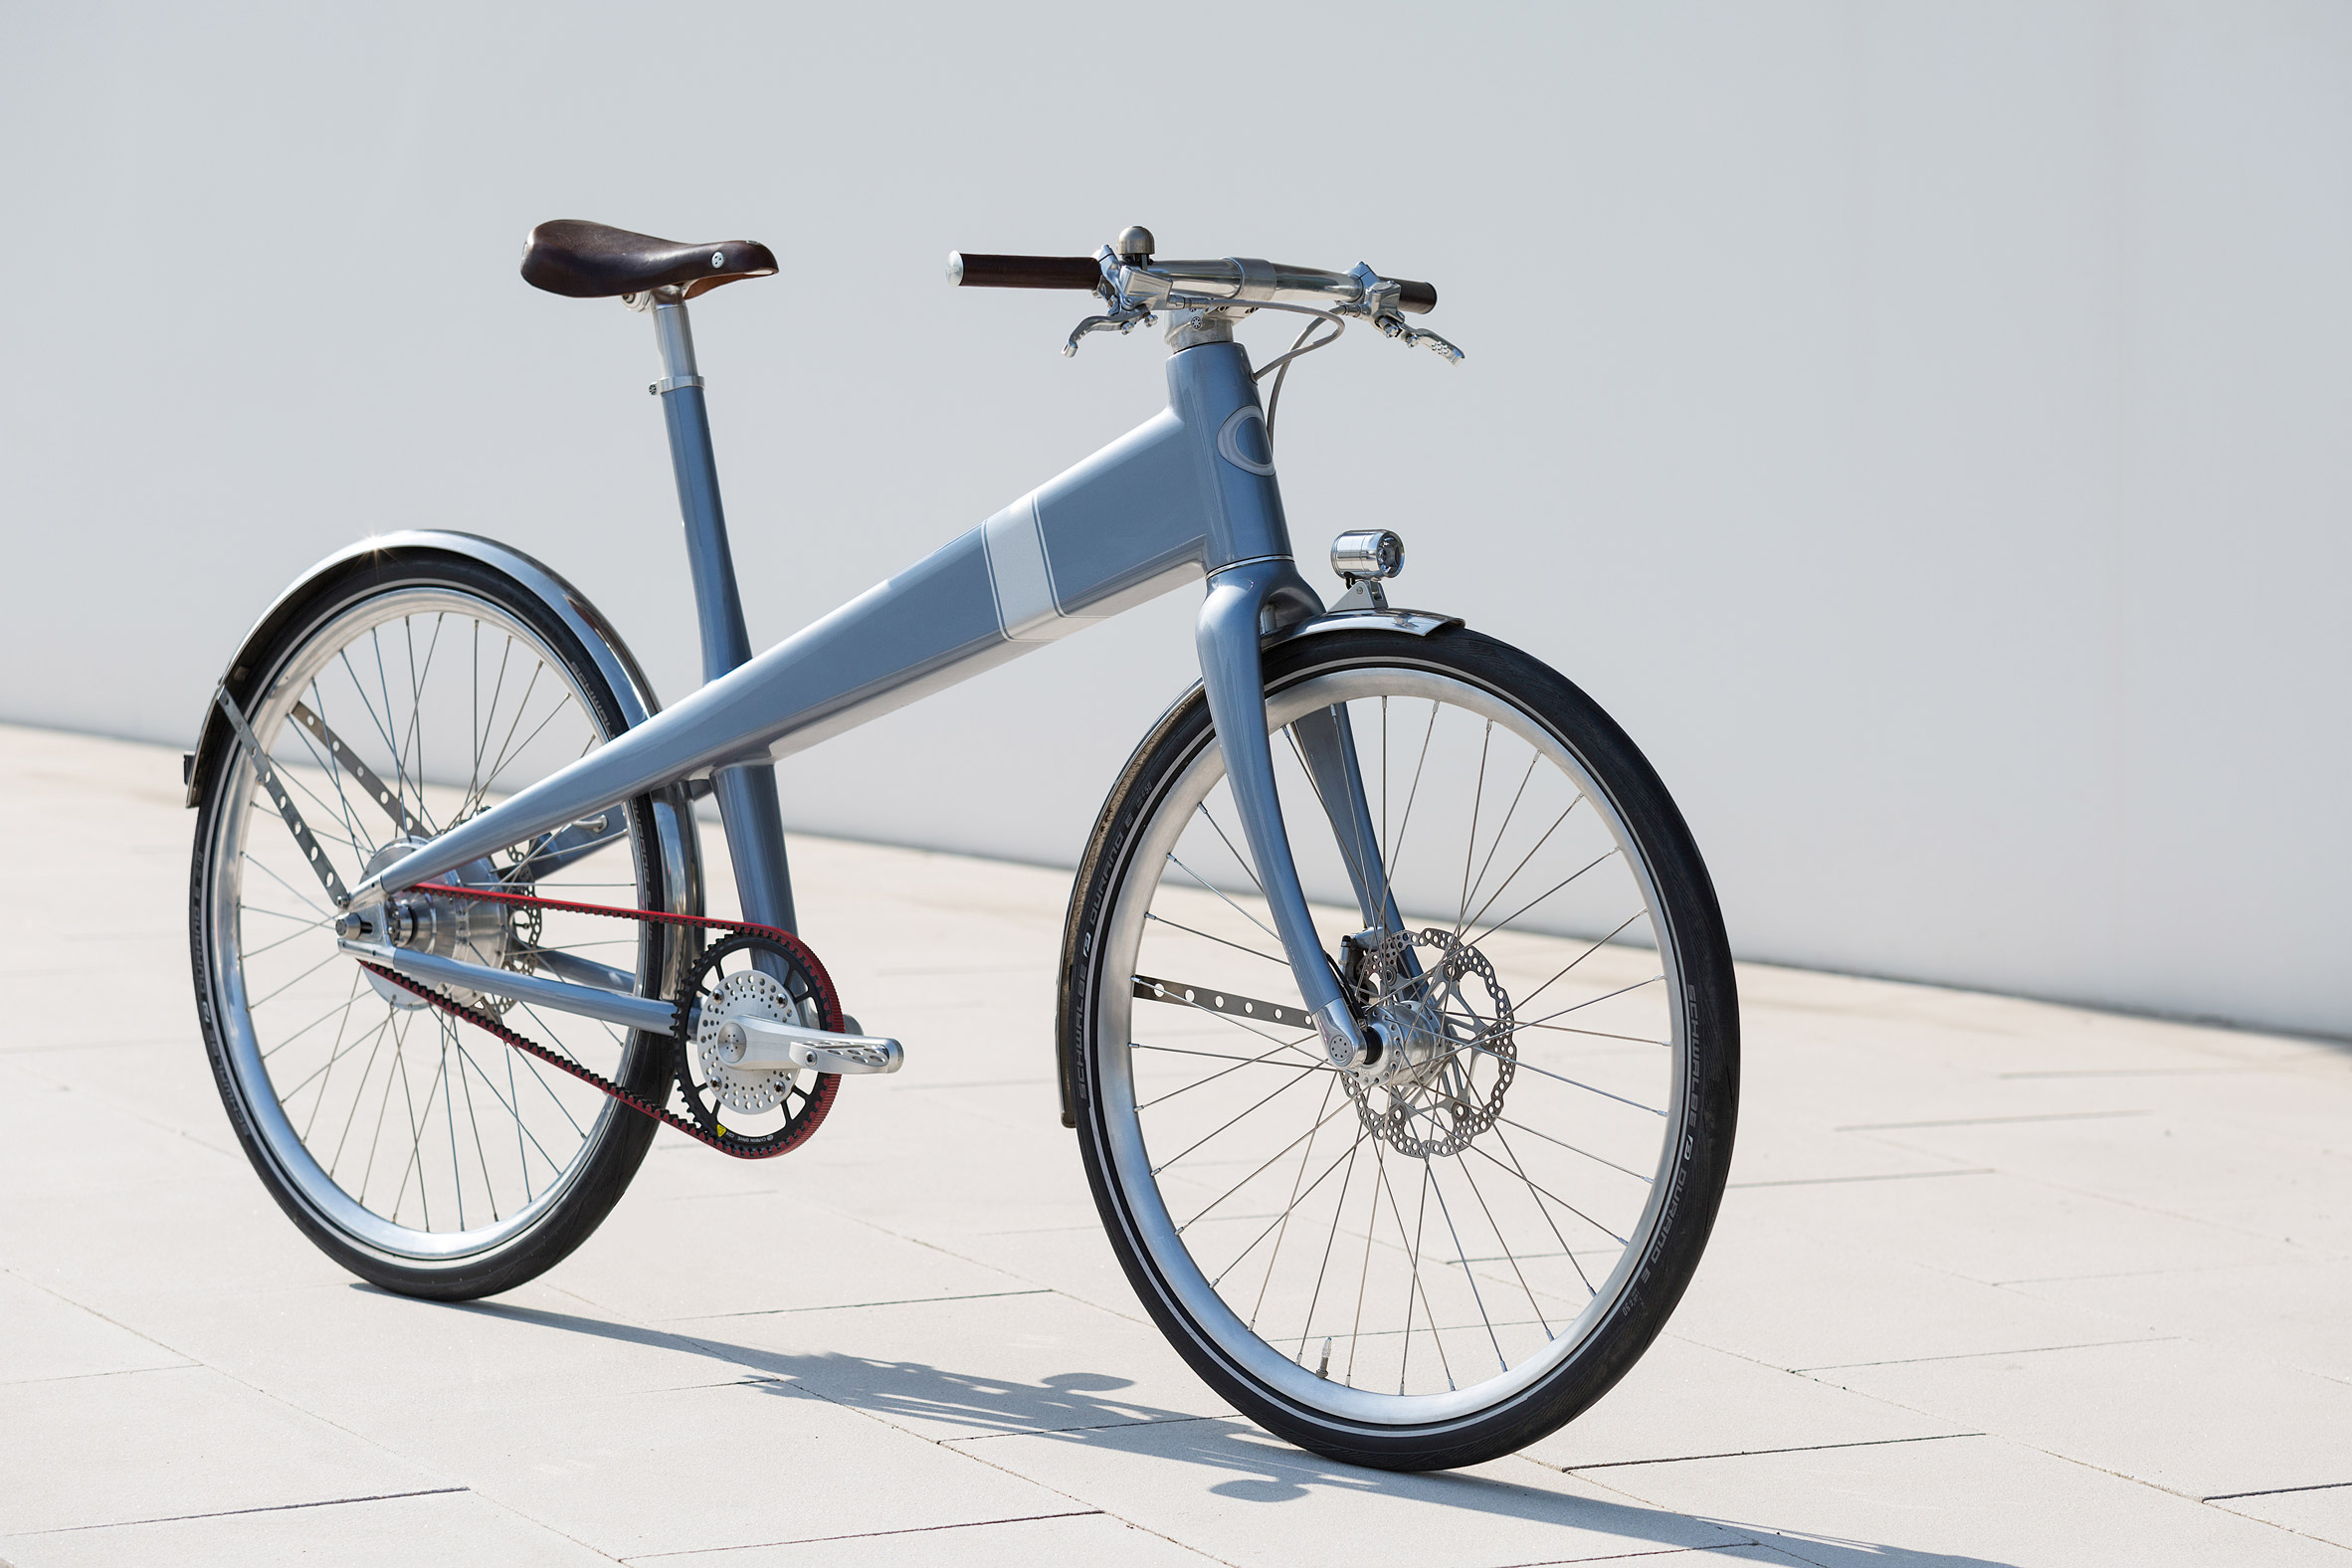 French bicycle company Coleen pays homage to Jean Prouvé's 1941 design with latest e-bike